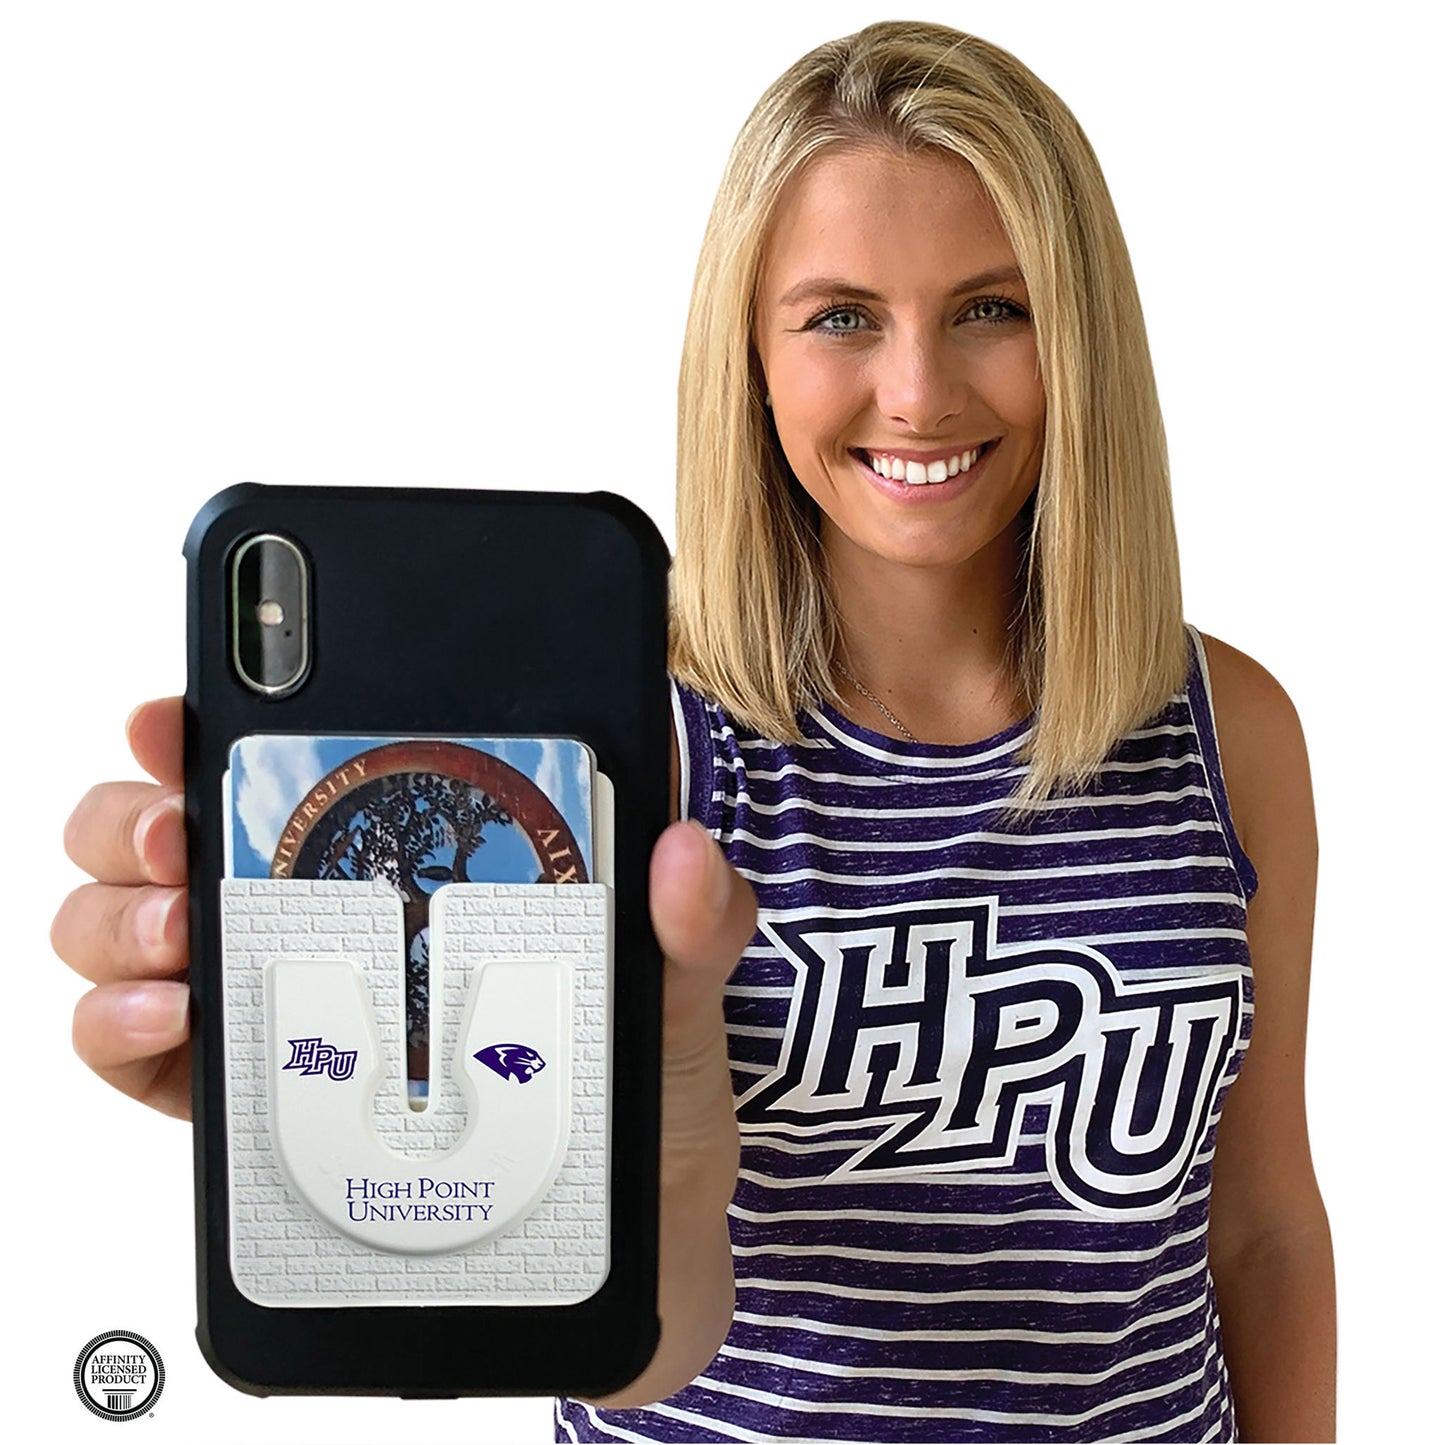 High Point University  LockIt™ Wallet Holder and Grip holder in one